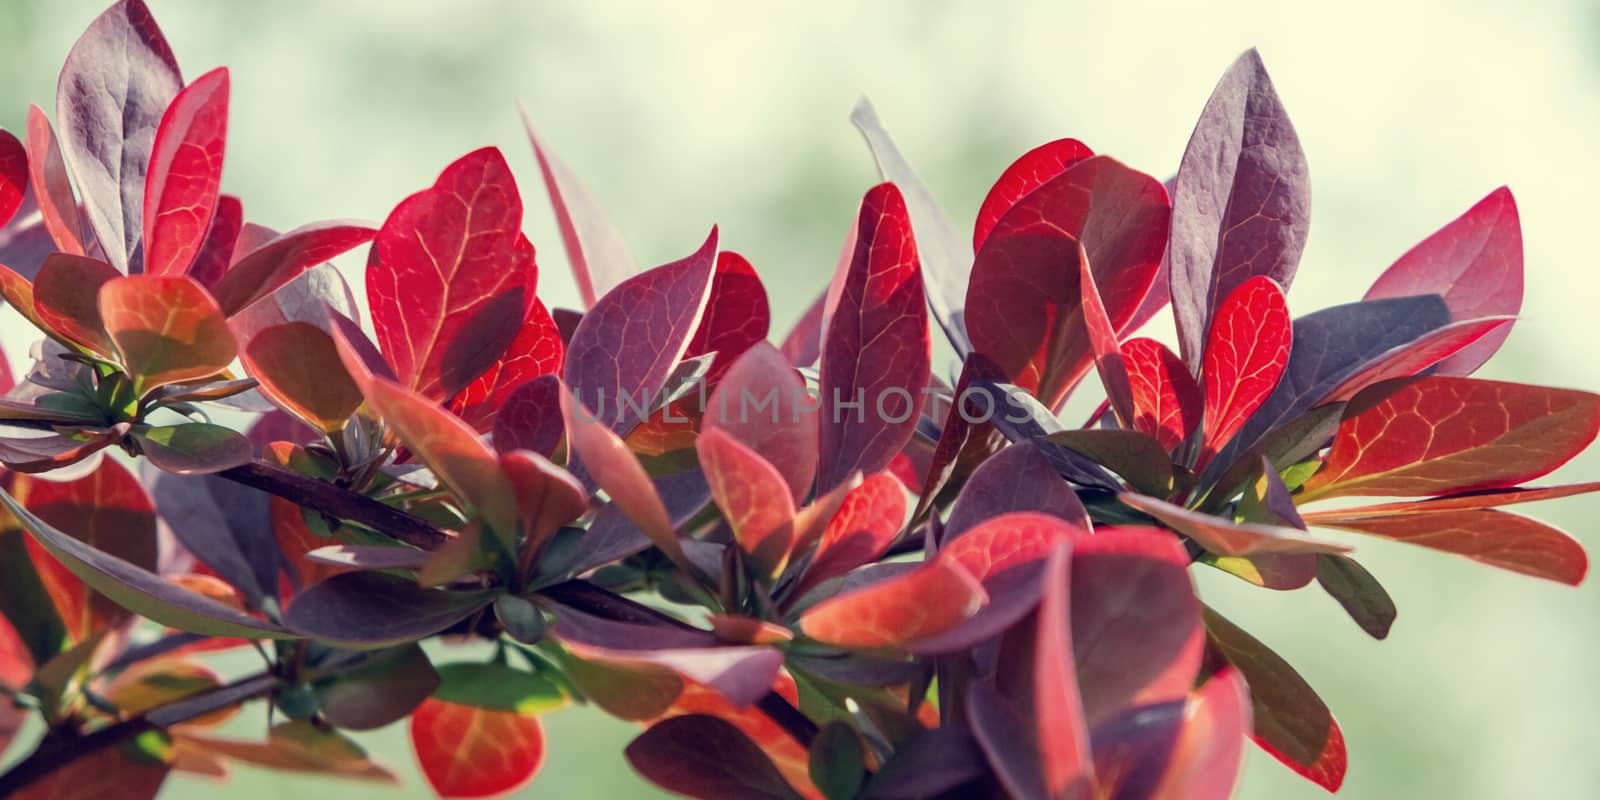 Twig Barberry Thunberg with red leaves close up, horizontal banner, natural plant background.